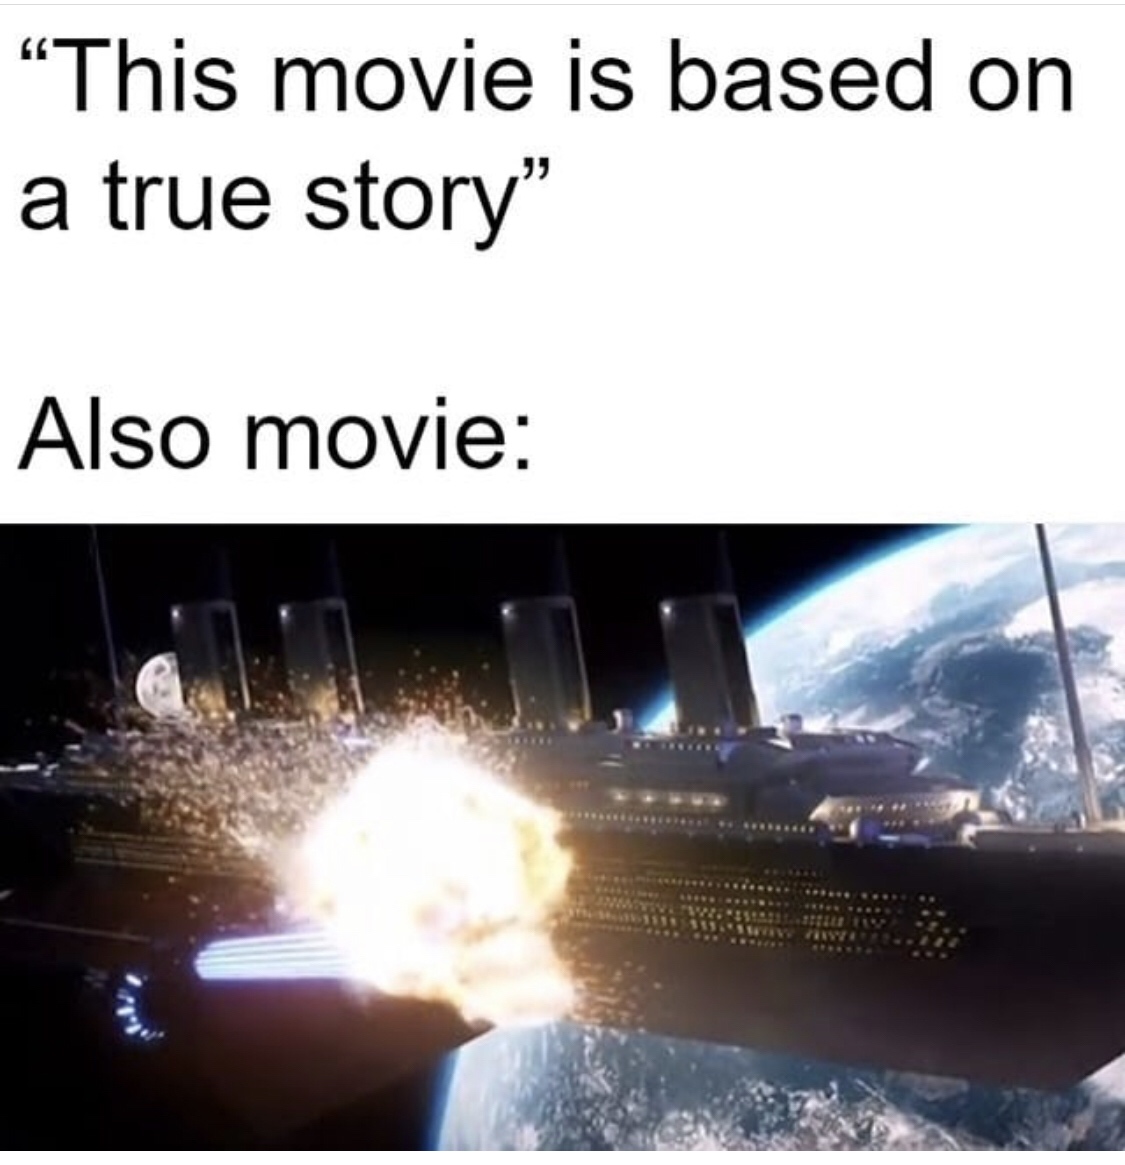 titanic spaceship - This movie is based on a true story" Also movie